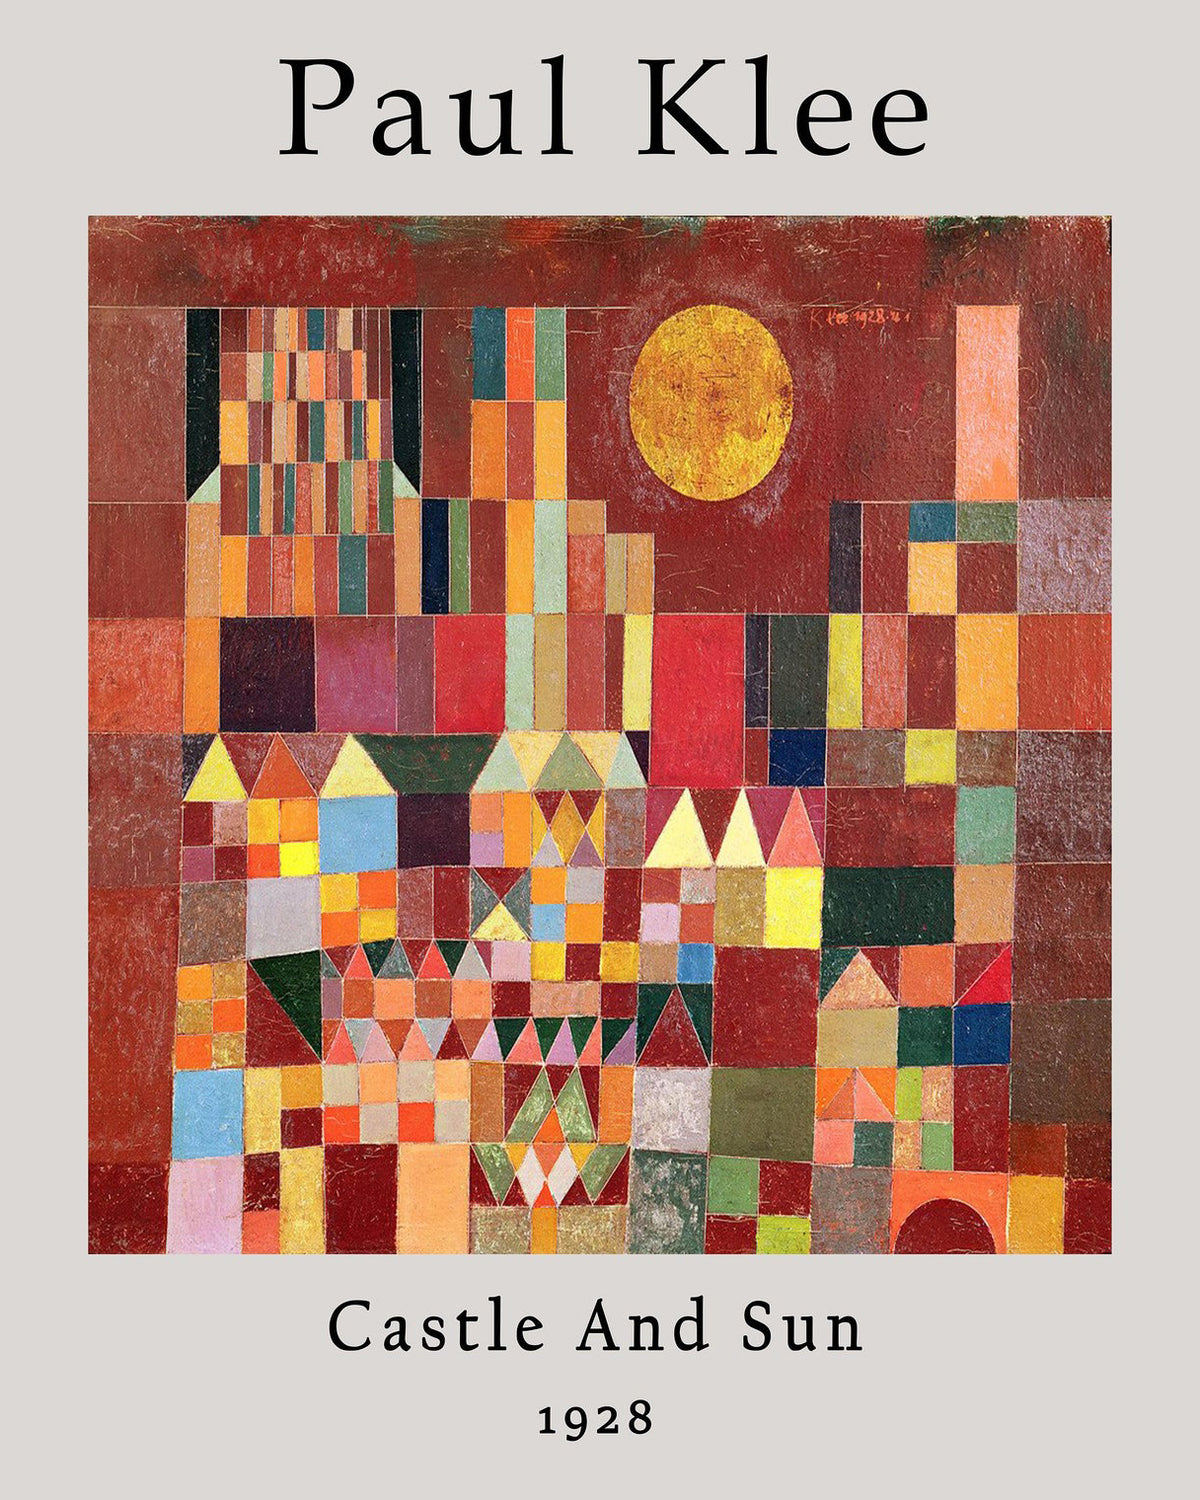 Paul Klee Exhibition Poster